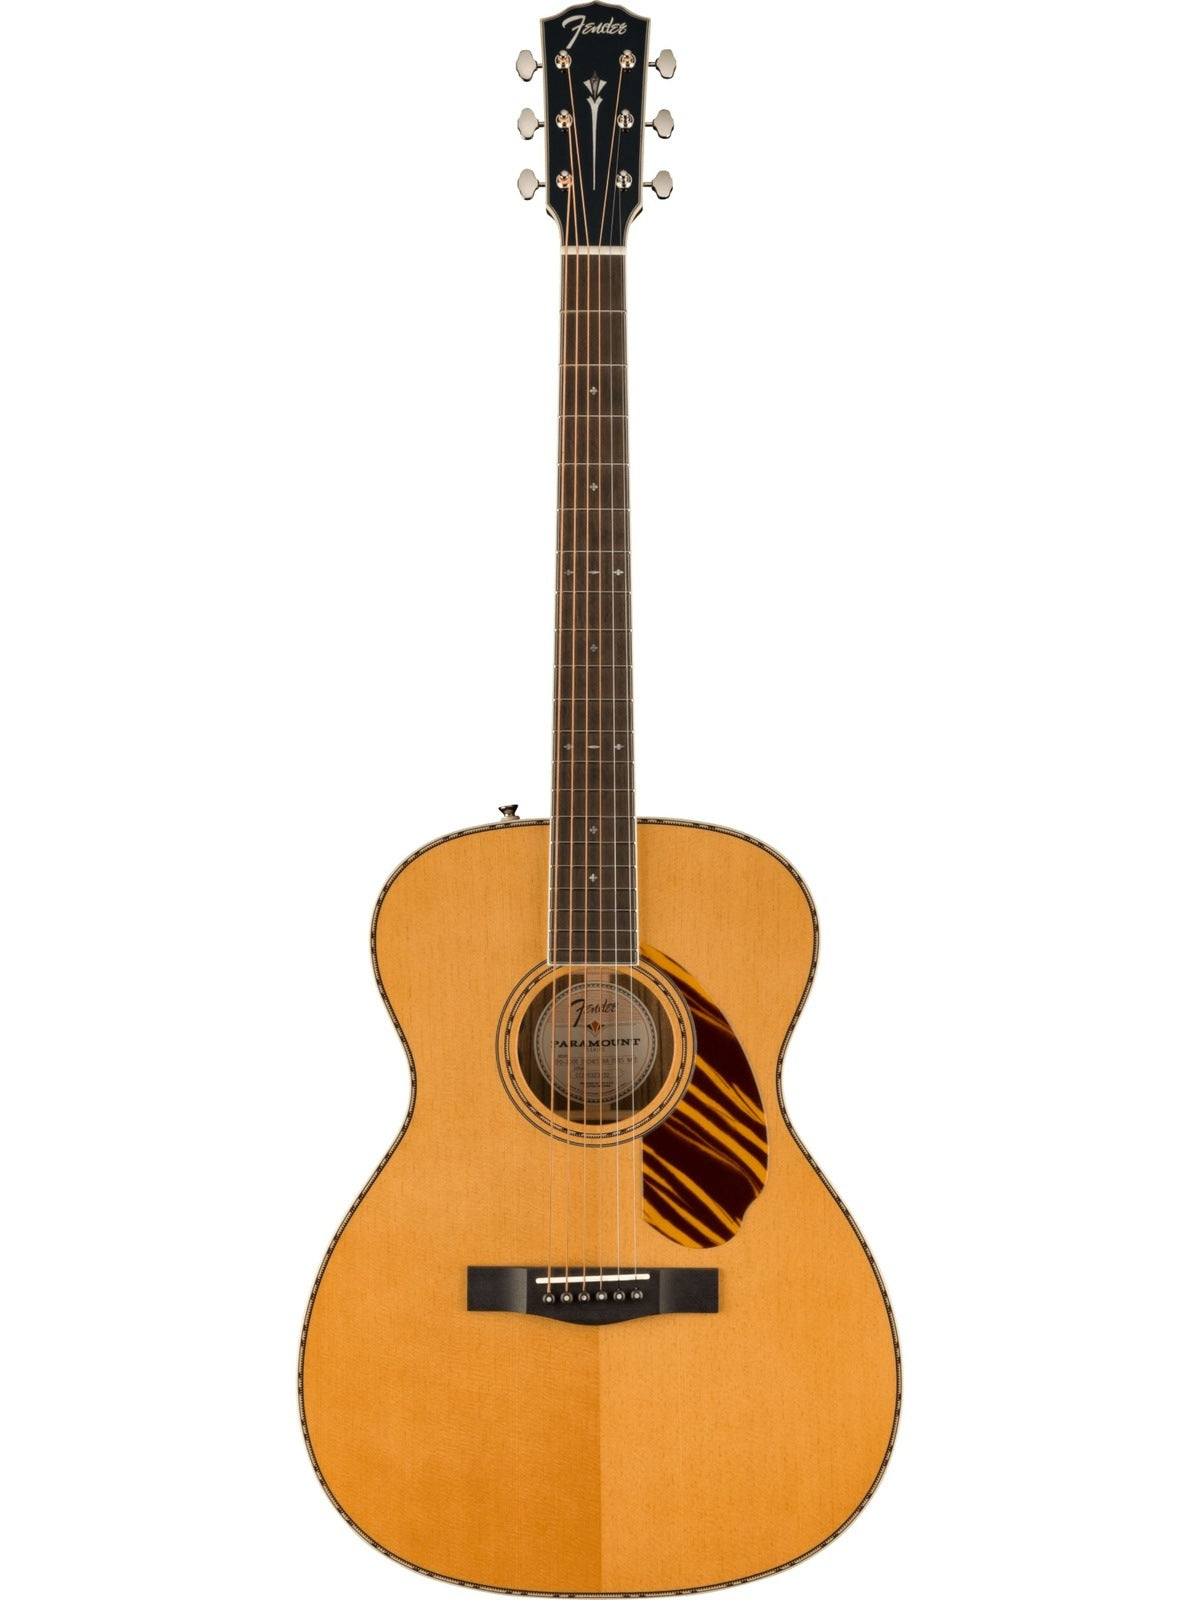 Fender Limited Edition PO-220E Orchestra, Aged Natural